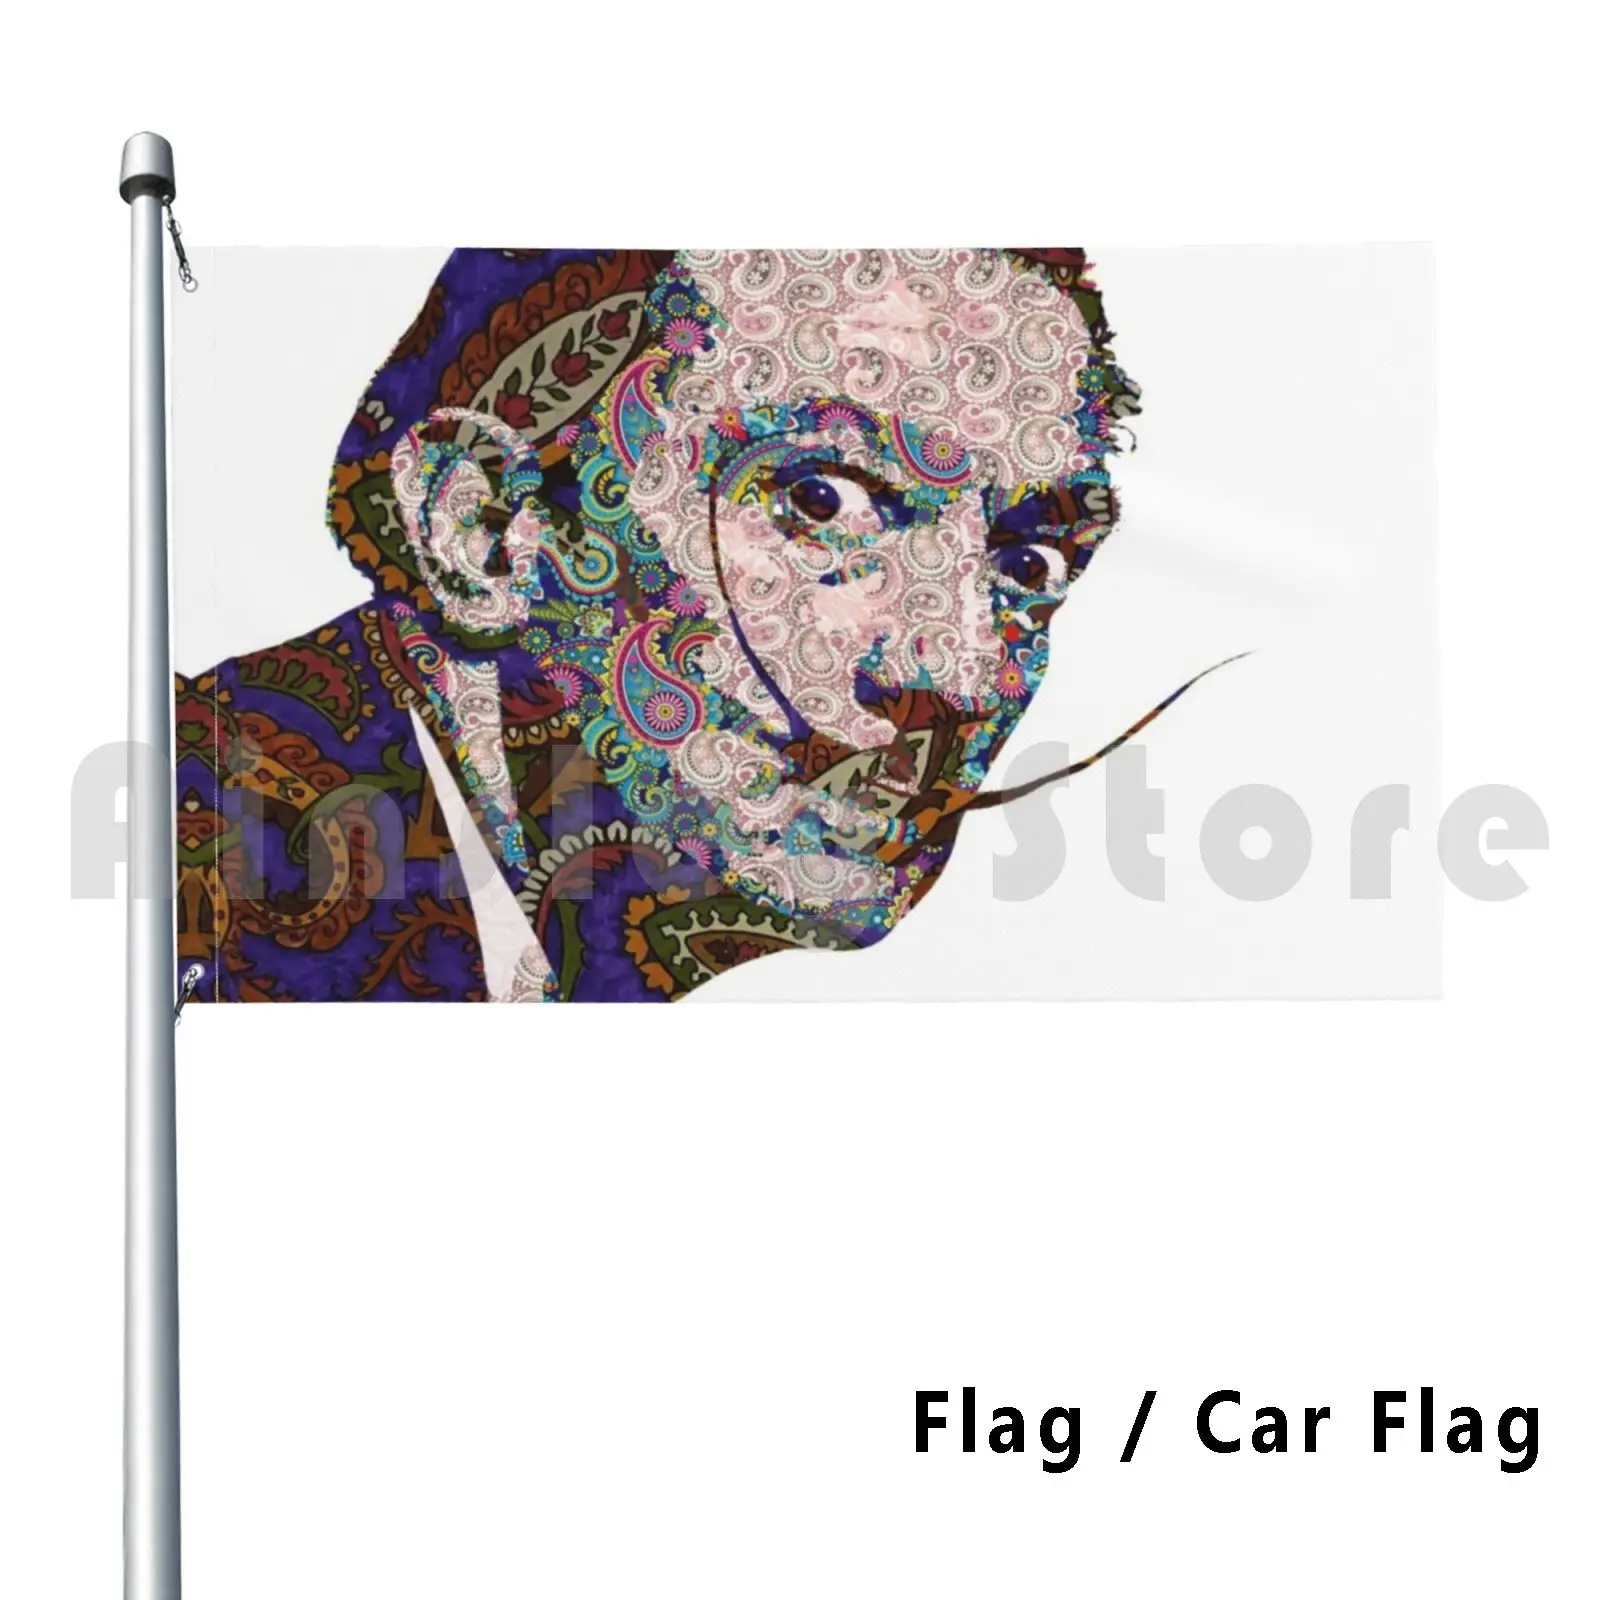 

Salvador Dali Flag Car Flag Funny Groovy Far Out Paisley Psychedelic Tripping Acid Lsd Surreal